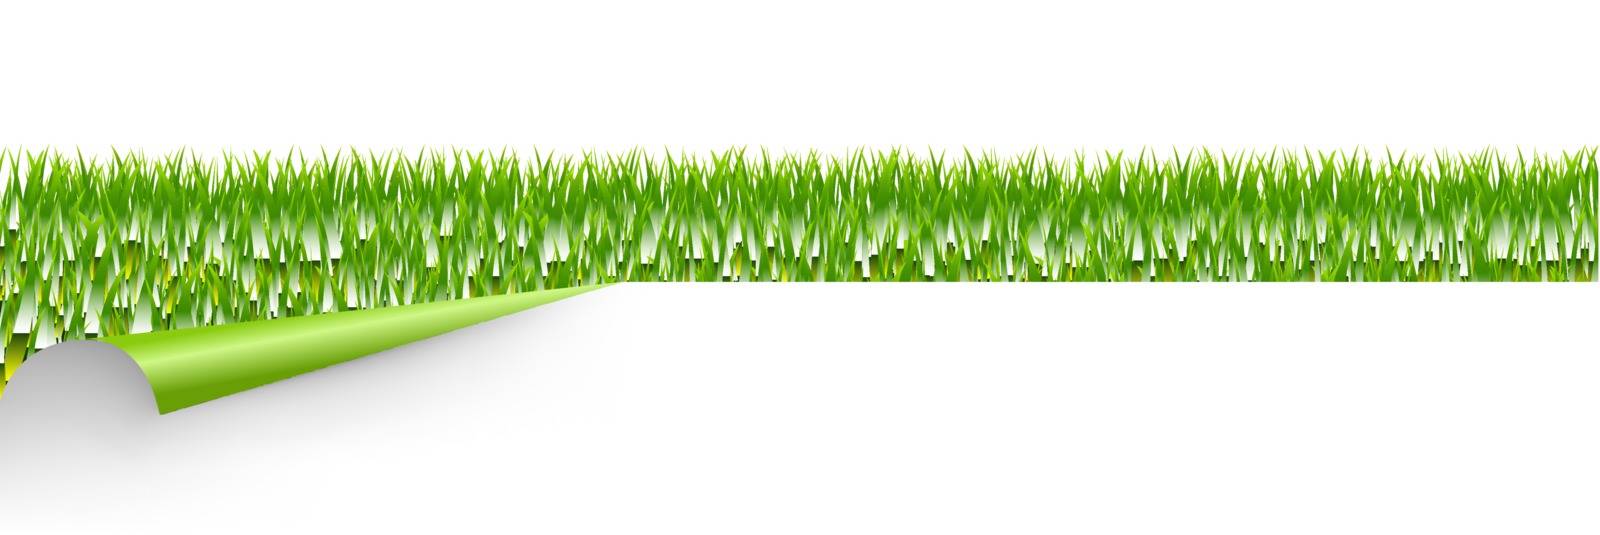 Green Grass With Green Corner With Gradient Mesh, Vector Illustration